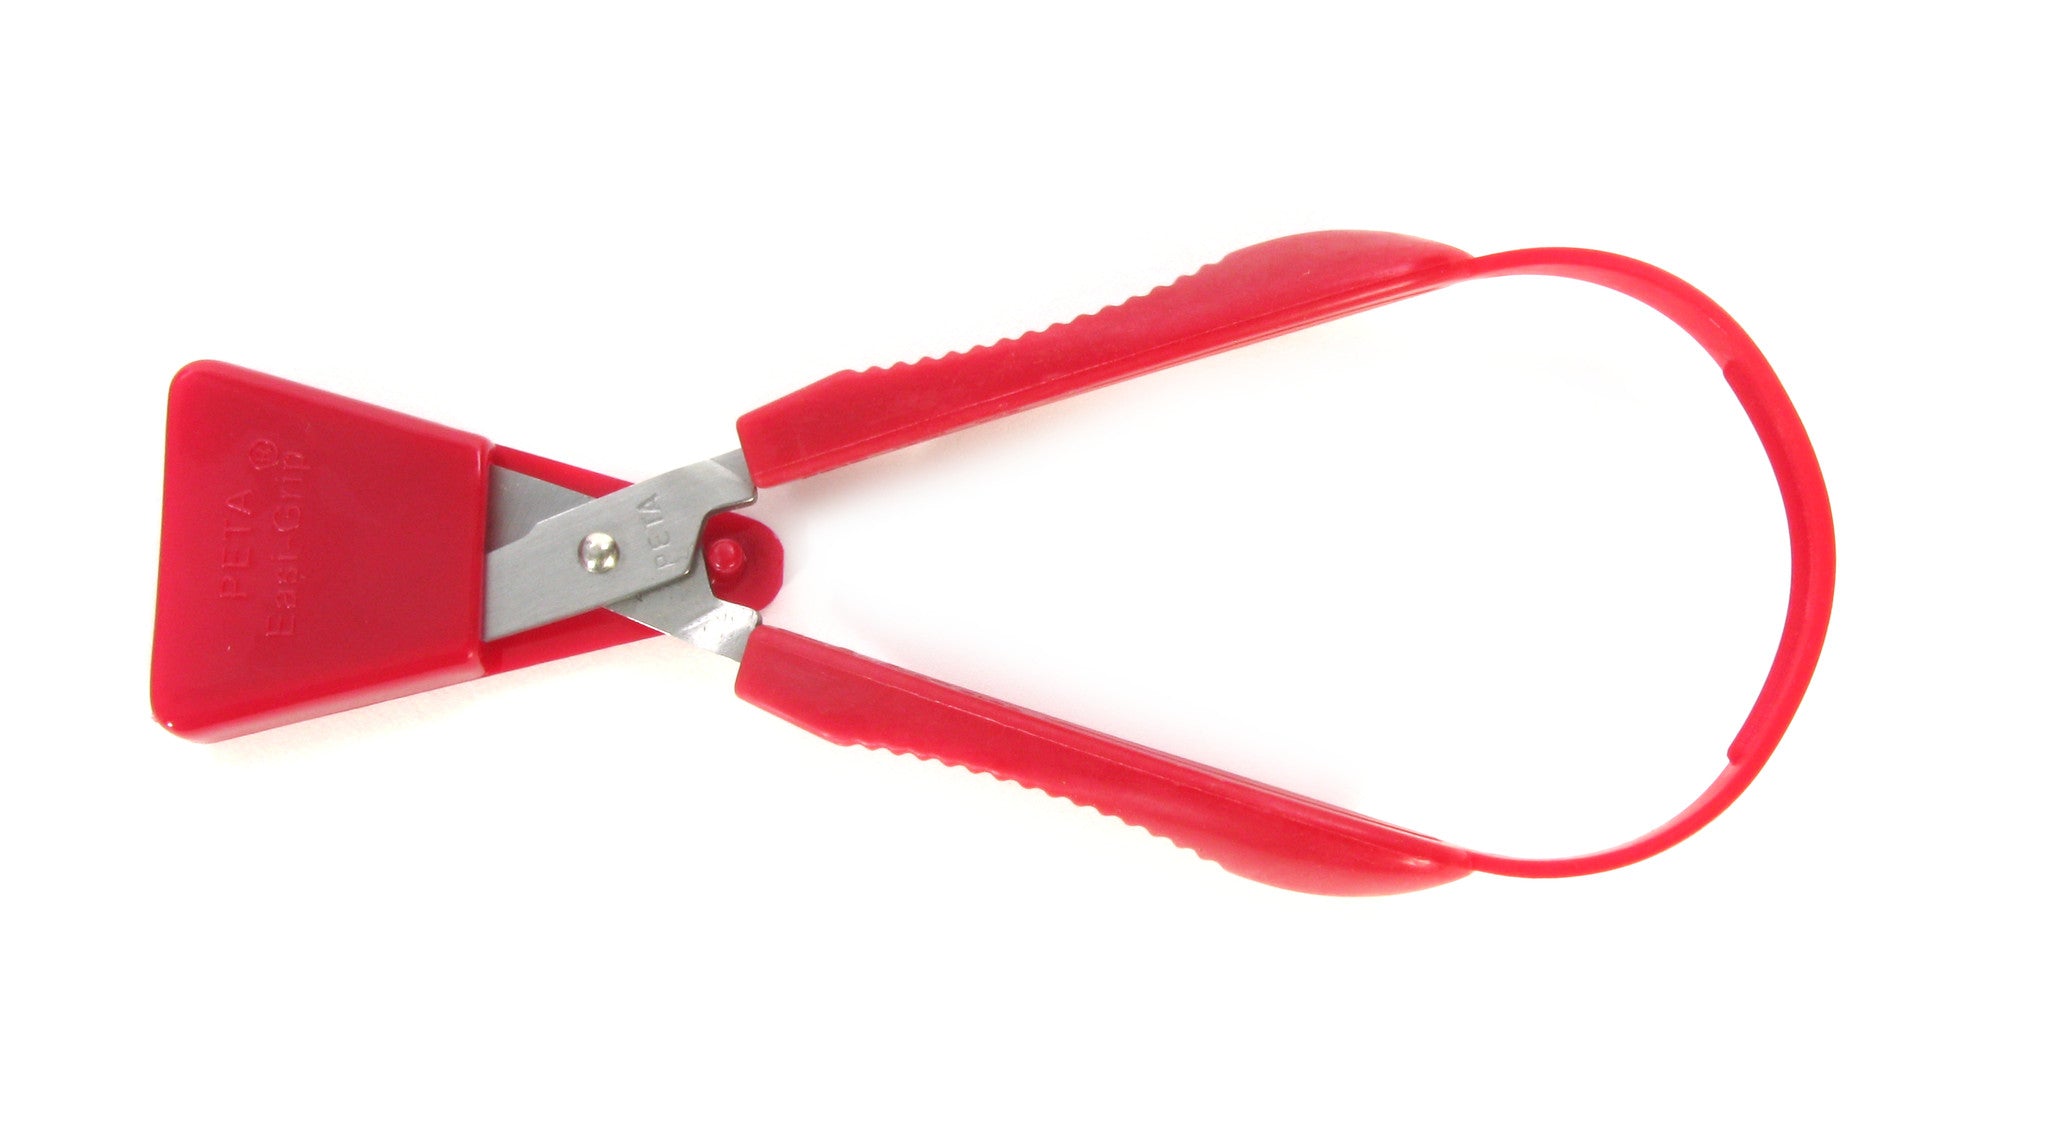 Adult Easi-Grip Mini Scissors :: lightweight, easy open and close